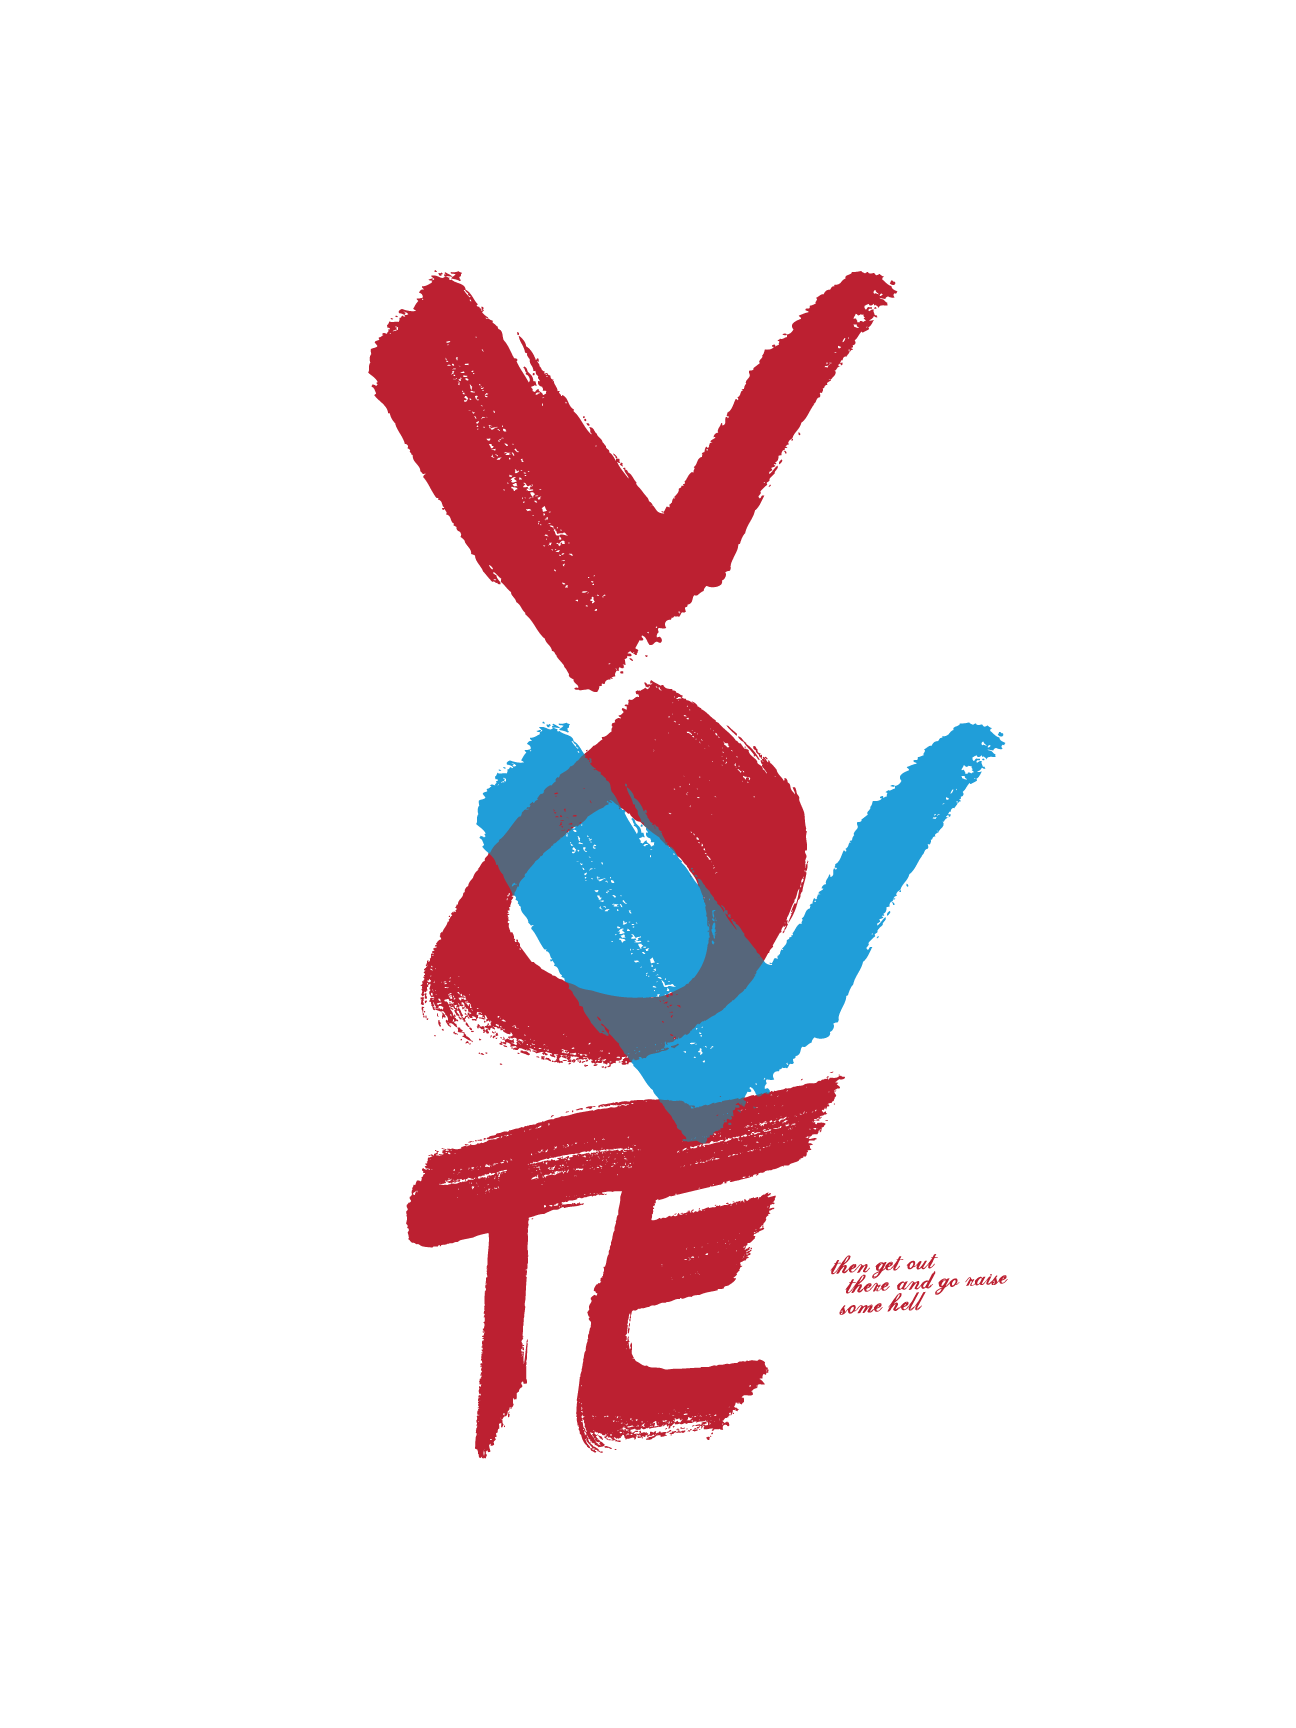 Painted Red V Logo - VOTE Blue | Power to the Poster